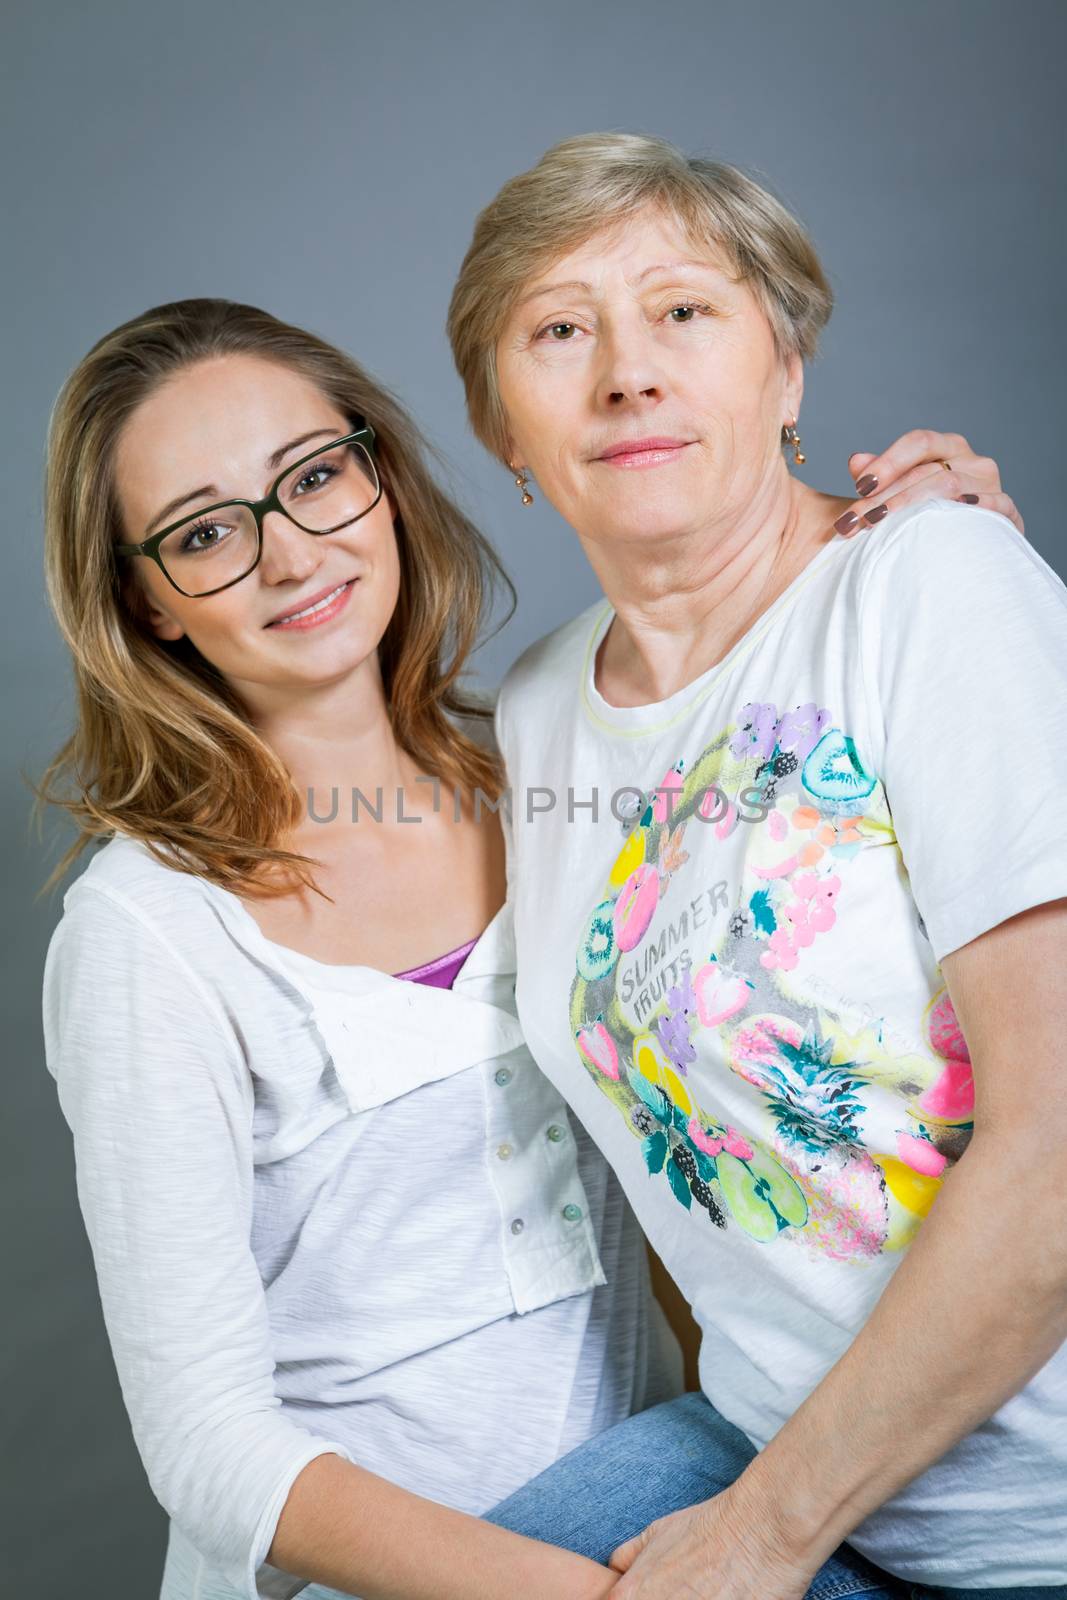 Loving grandmother and teenage granddaughter posing for a portrait holding hands and smiling at the camera, on a grey studio background